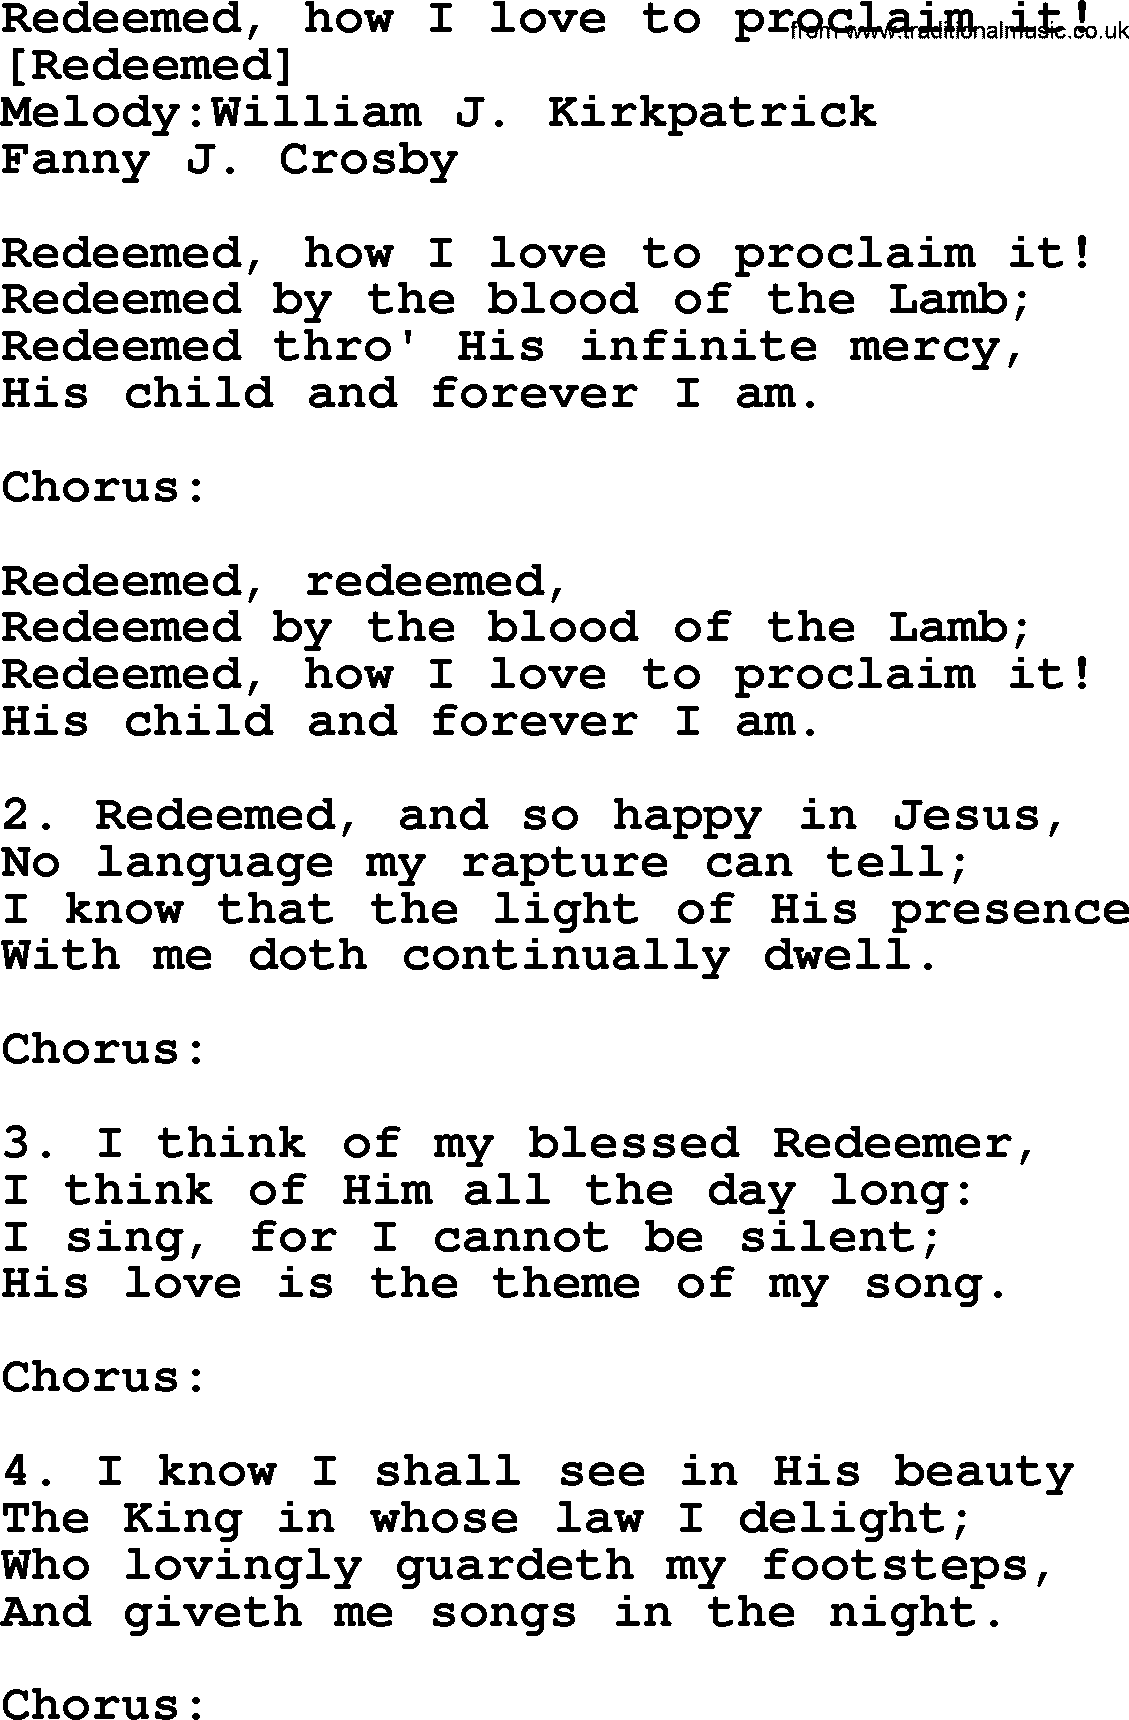 Old American Song: Redeemed, How I Love To Proclaim It!, lyrics